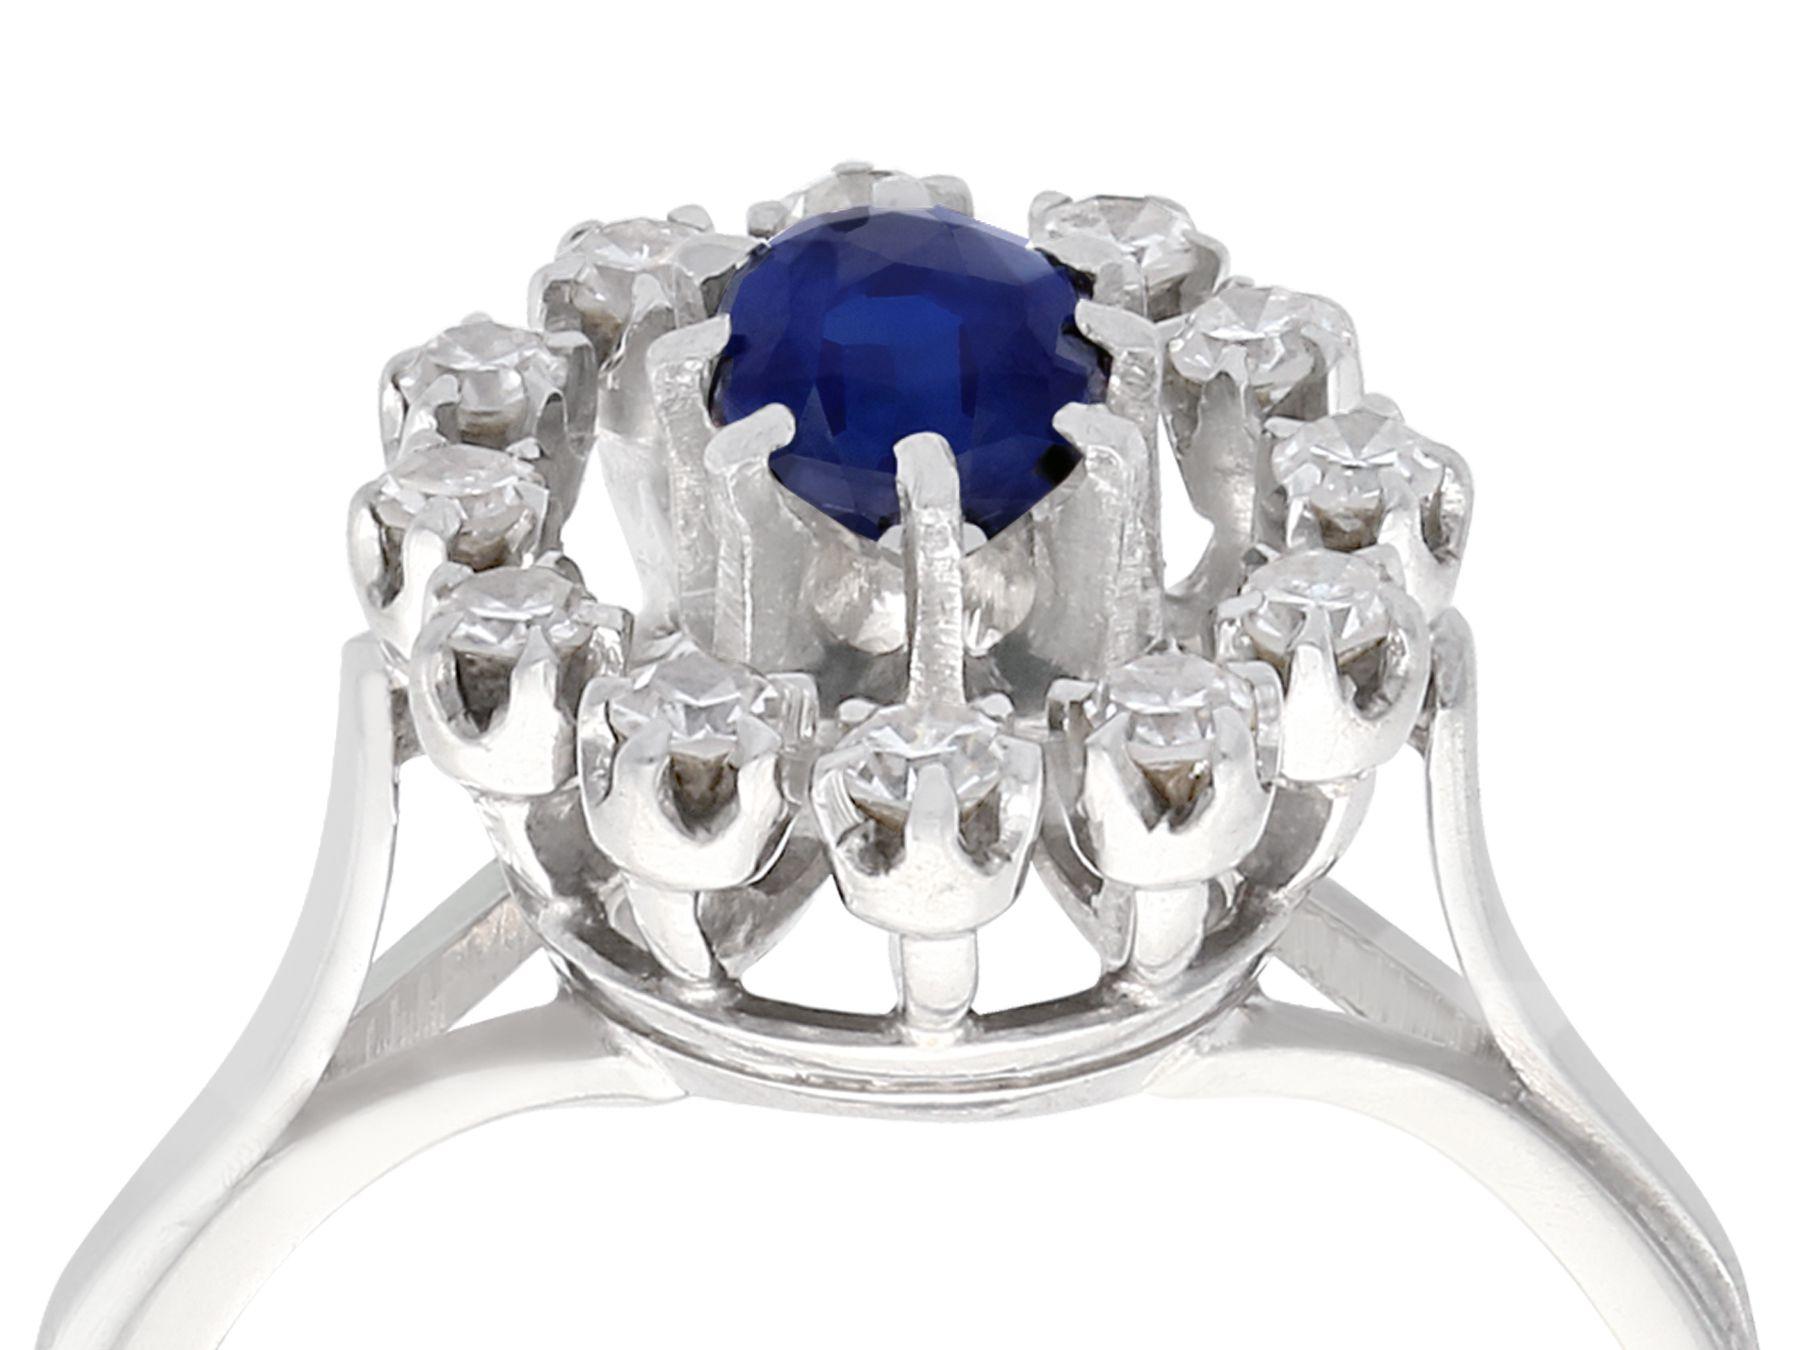 An impressive vintage French 0.60 carat sapphire and 0.42 carat diamond, 18 karat white gold cluster ring; part of our diverse antique jewelry collections.

This fine and impressive small sapphire and diamond cluster ring has been crafted in 18k